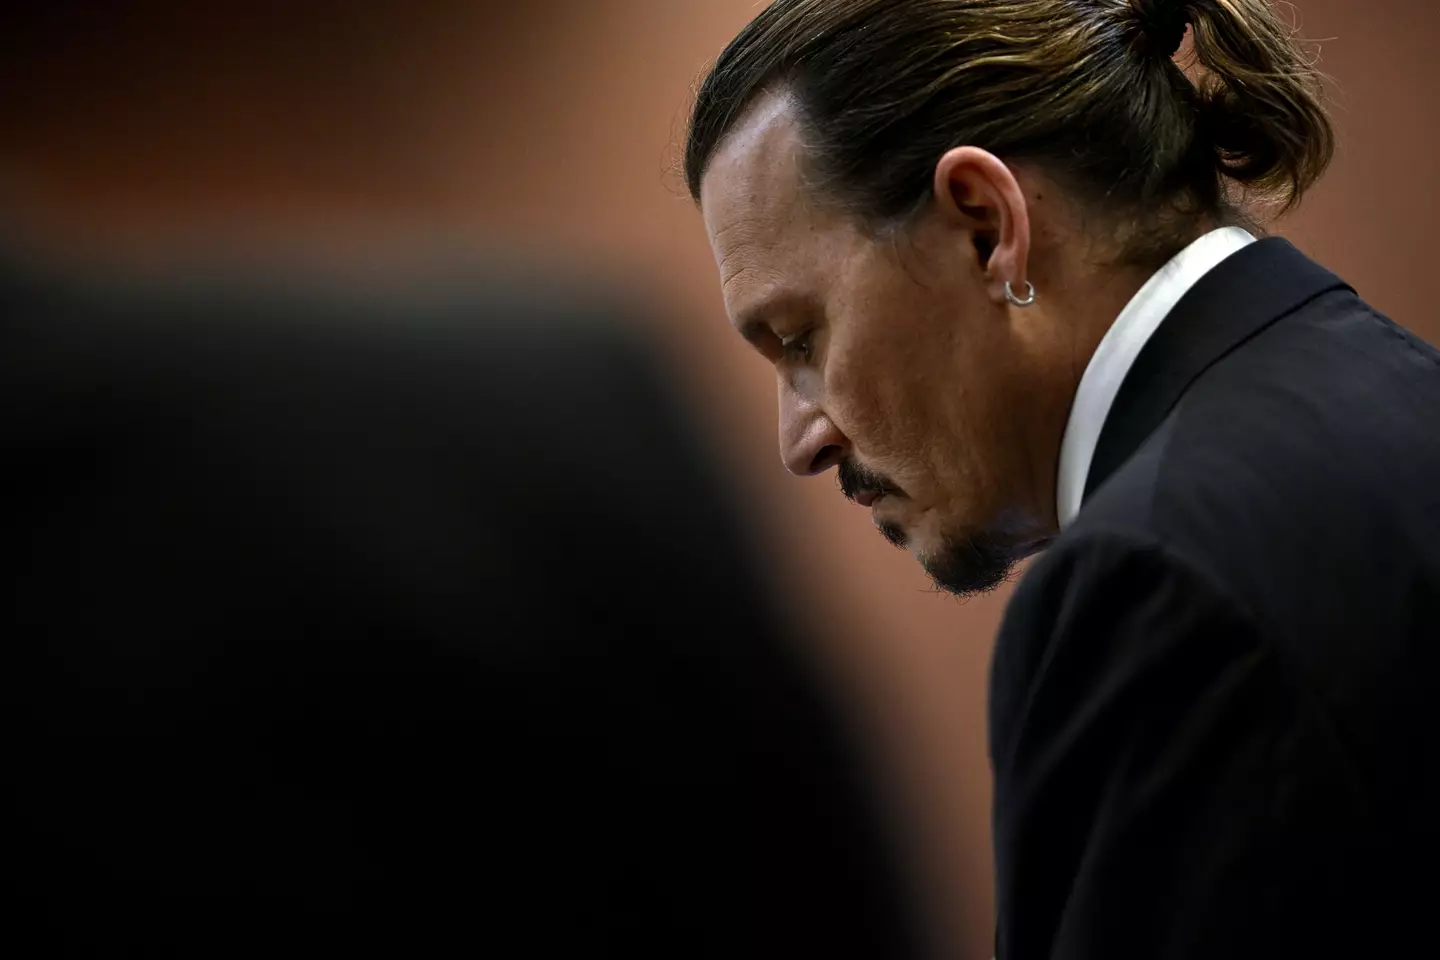 Johnny Depp is suing Heard for defamation.